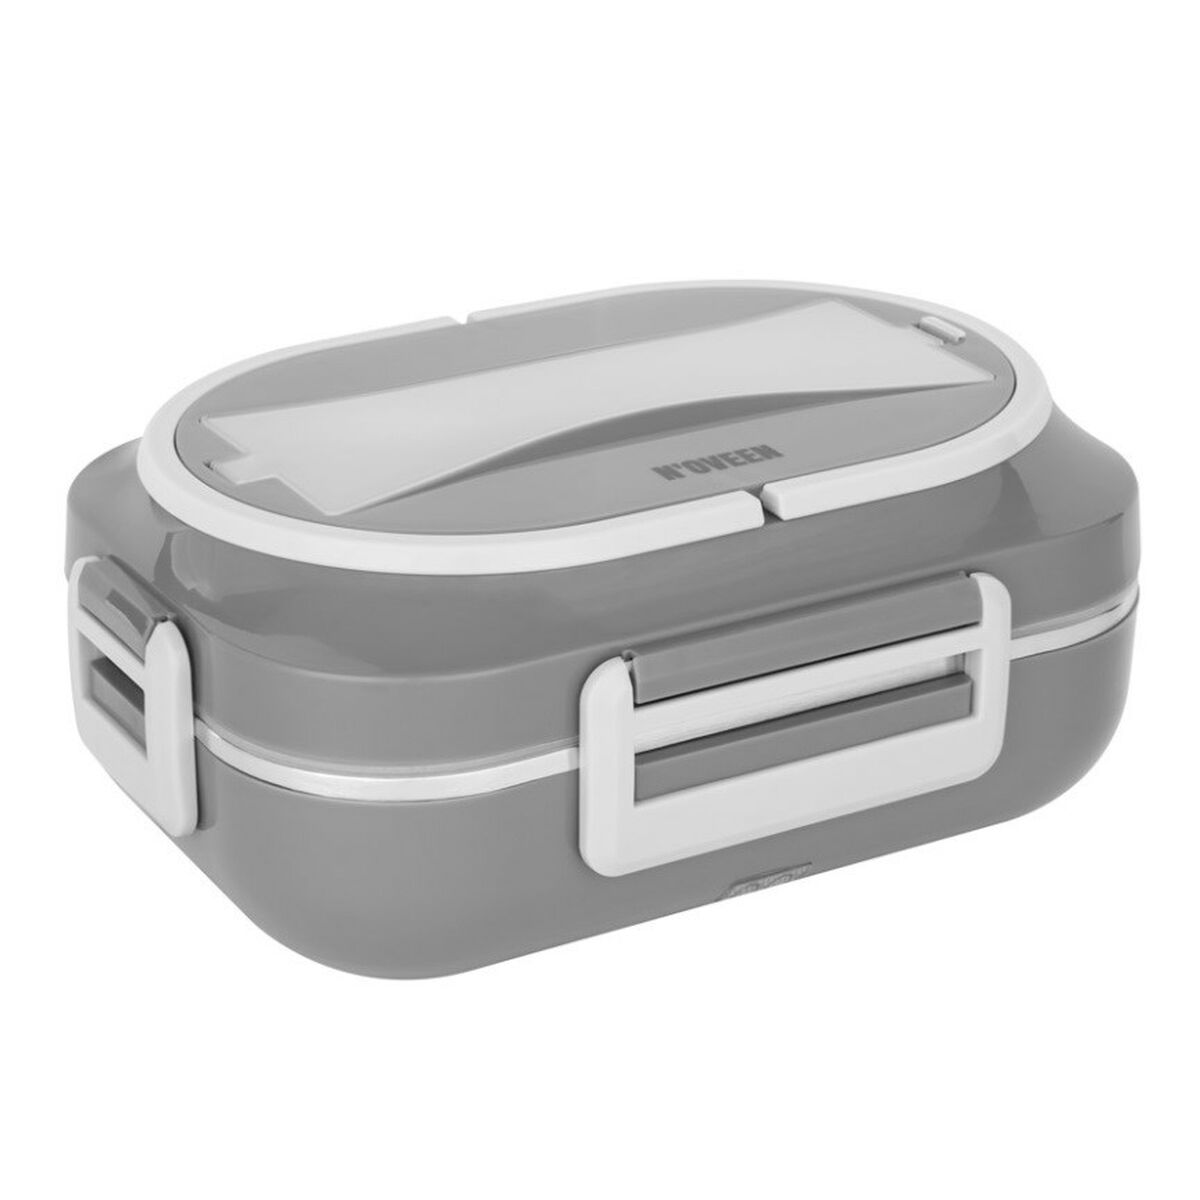 Lunchbox N'oveen LB540 Donker grijs Roestvrij staal 1 L 24 x 11 x 18,5 cm